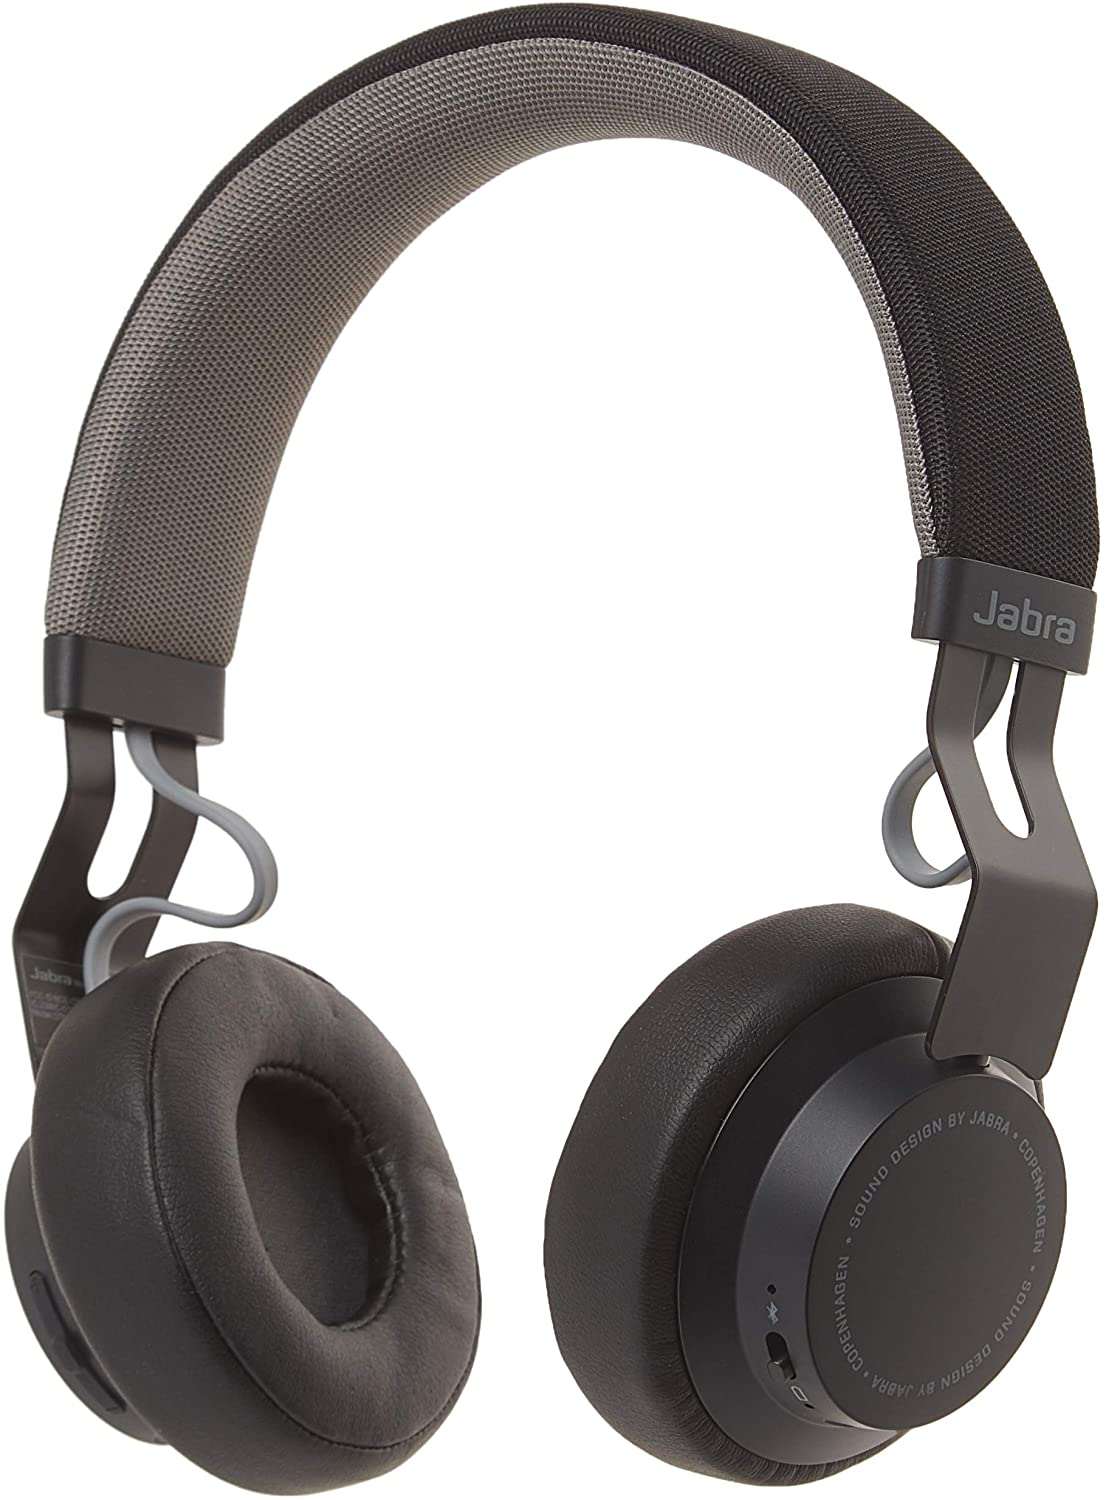 Jabra Elite 85h wireless noise cancelling headphones and more also on sale today 